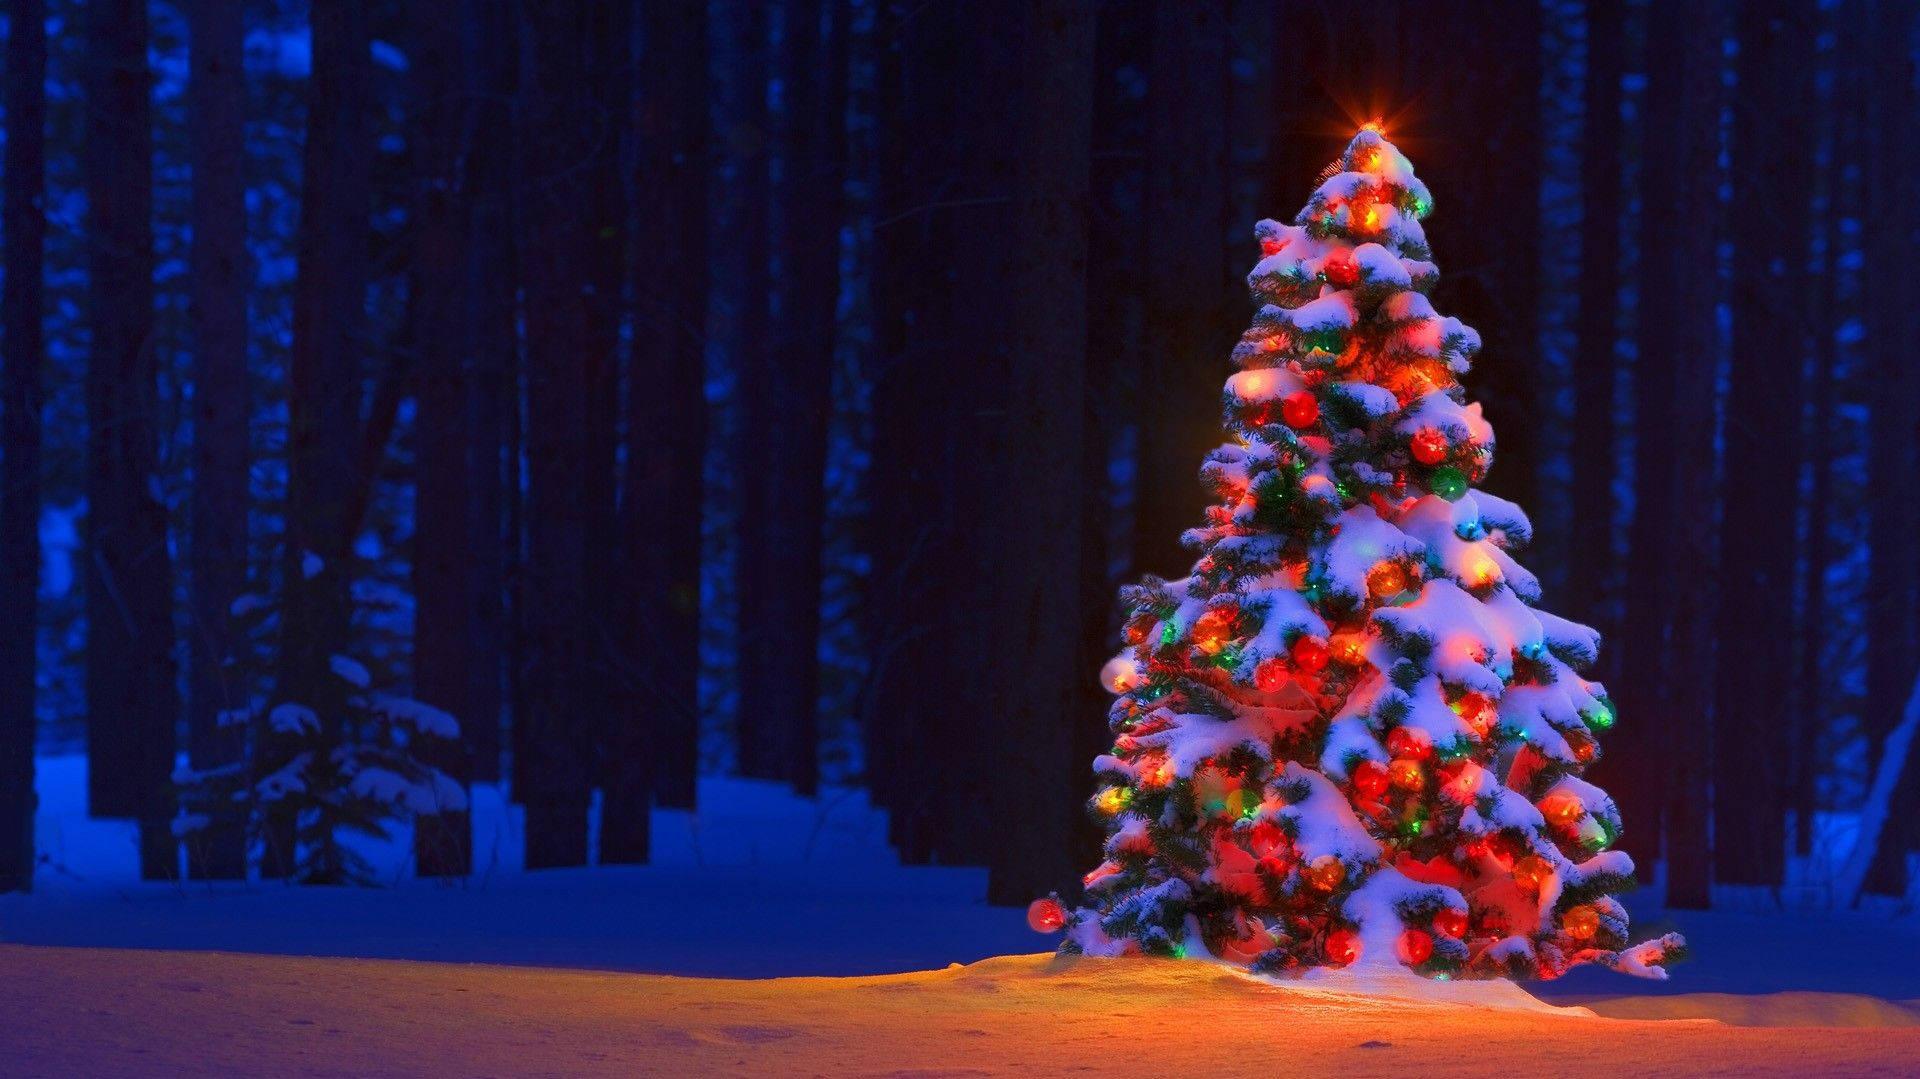 A Colorful Christmas Tree In Winter Wonderland